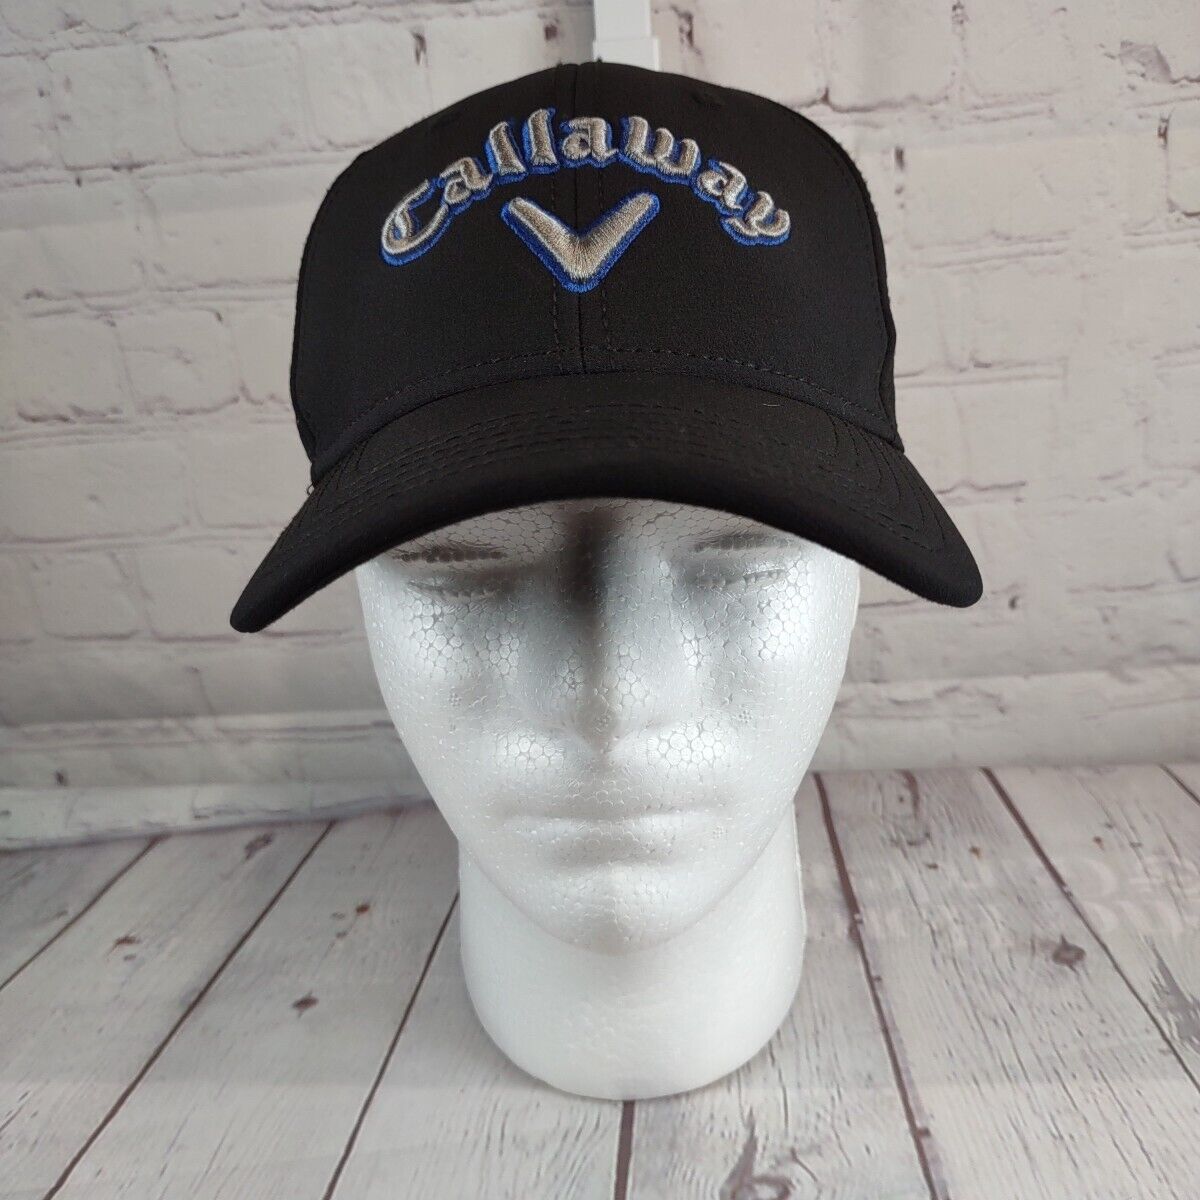 Callaway Golf A-Flex Cap Black with Grey/Blue Letters Hat Fitted Size S/M